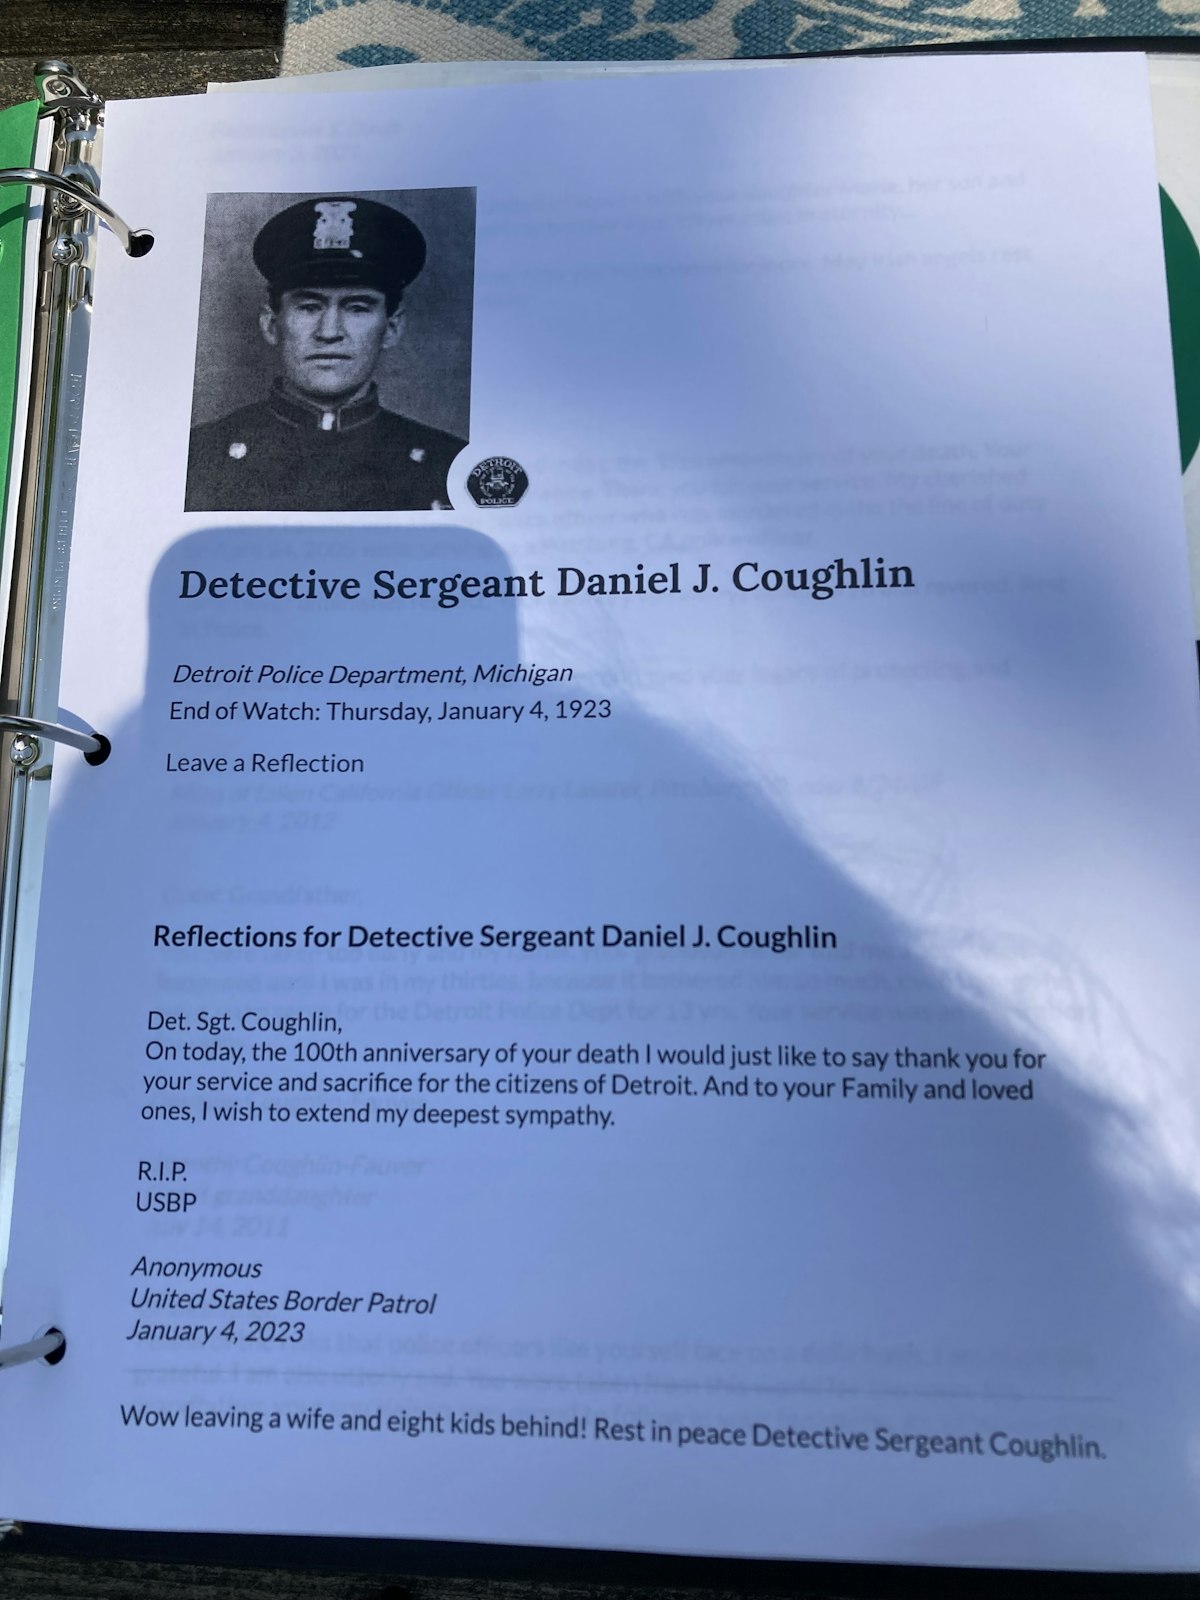 Remembrances posted to the End of Watch website memorialize Det. Sgt. Coughlin. Family members, including those who never met him in person, say it's important to remember those who gave their lives for others.